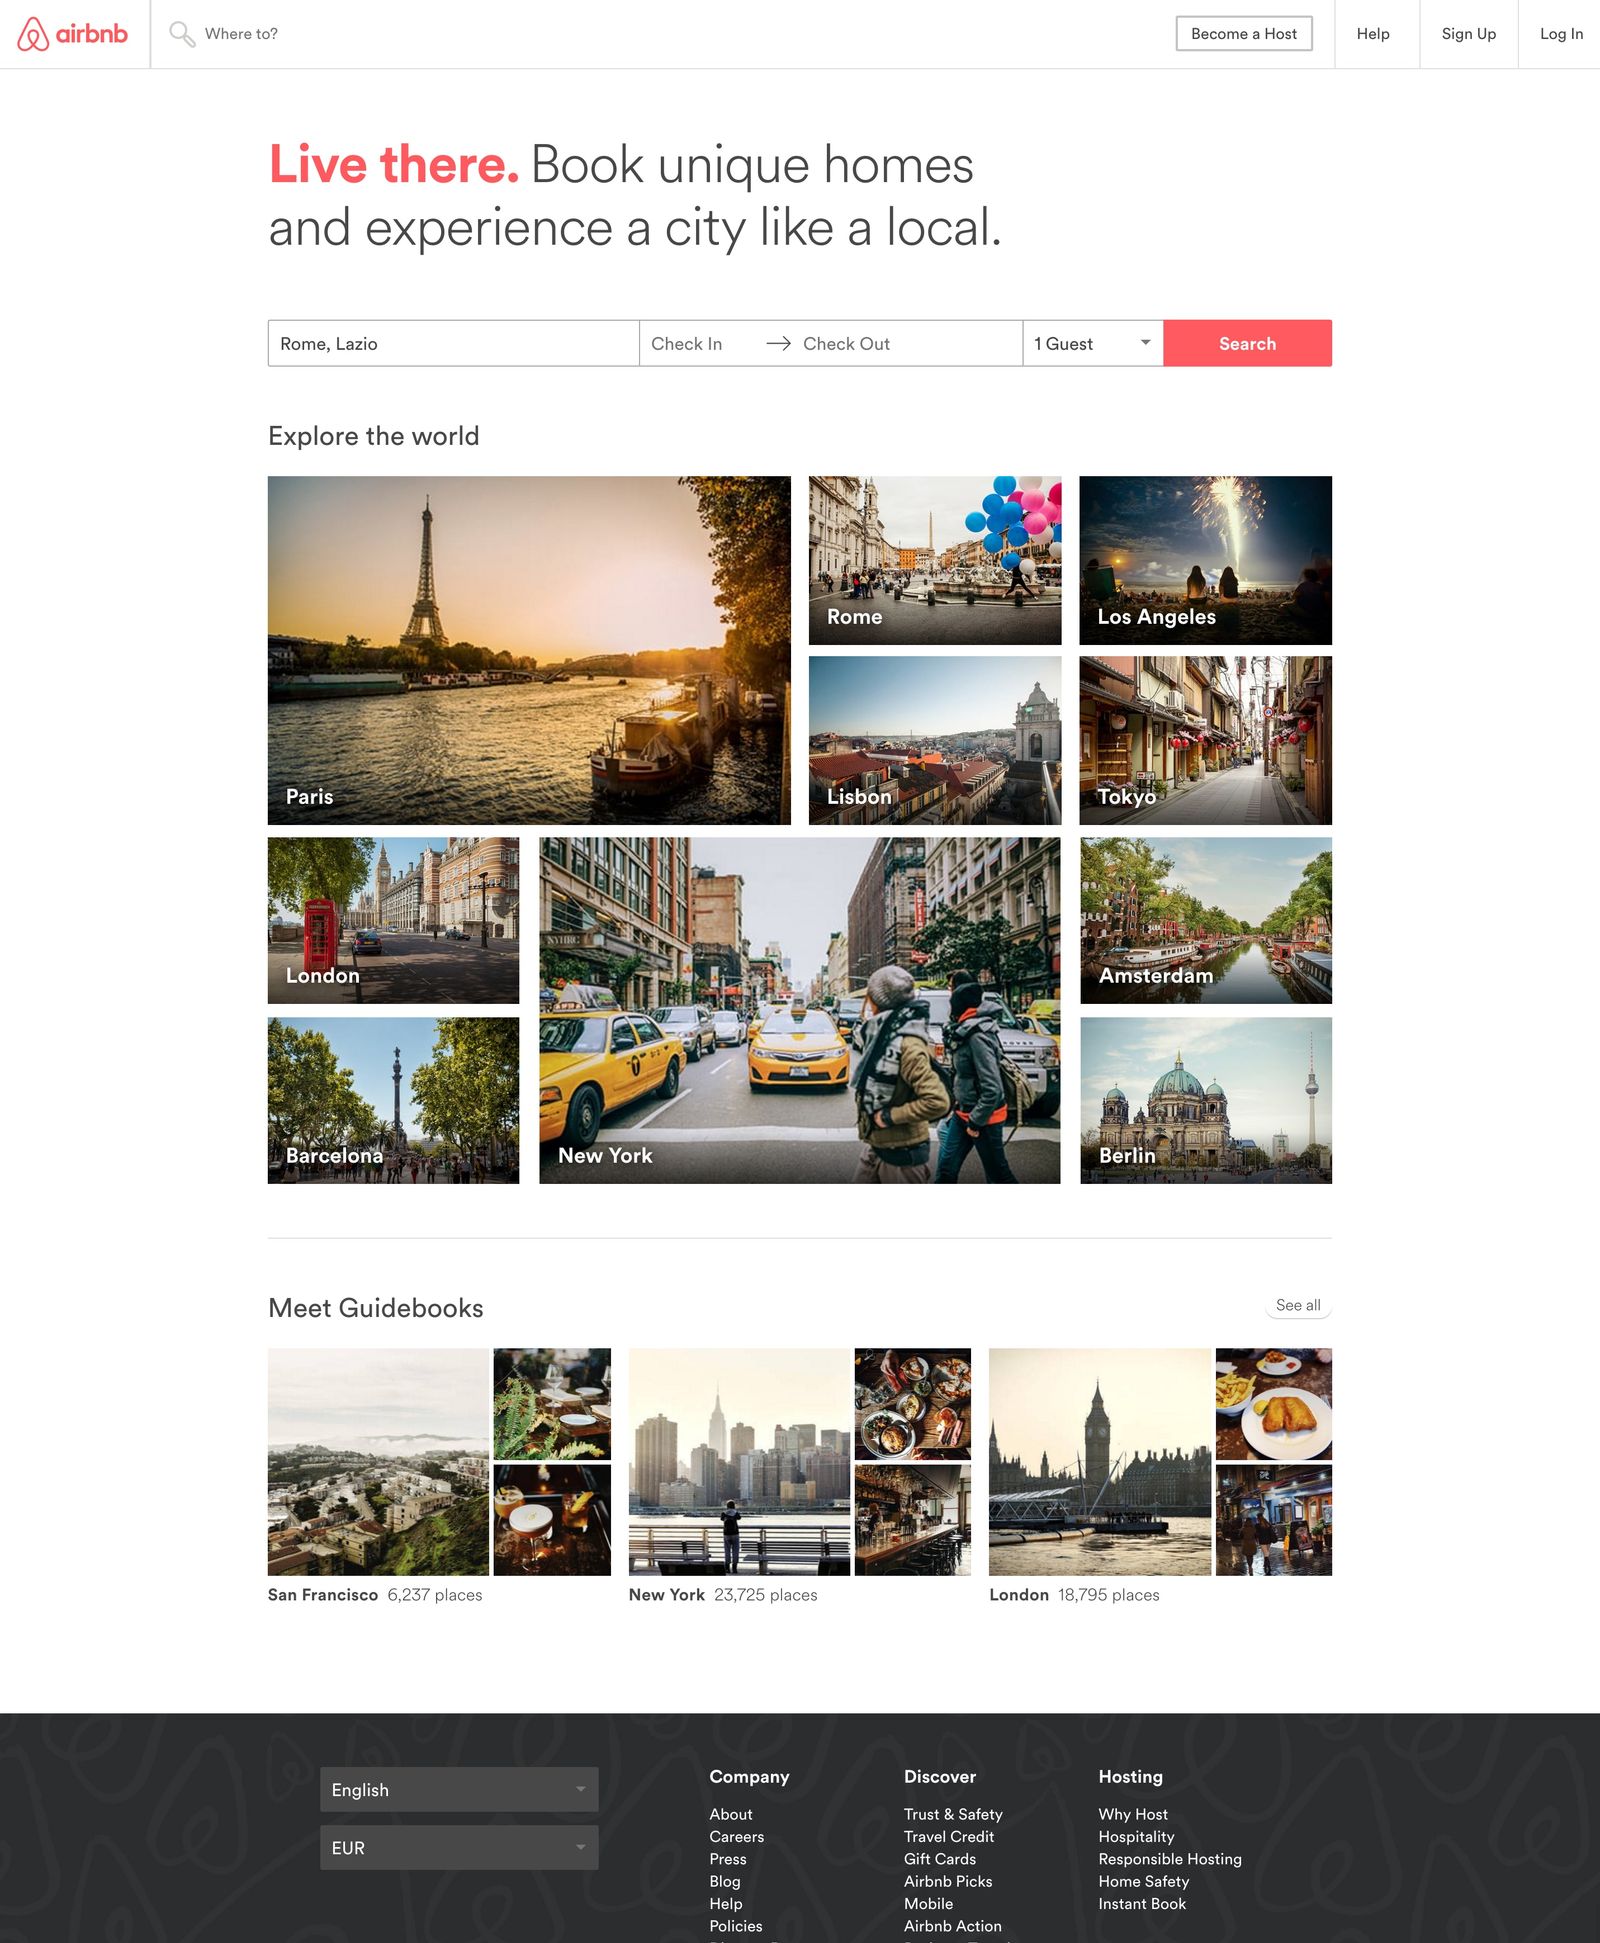 /articles/landing-page-inspiration/landing-page-design-example-11.jpg)_Saas Landing page example from Airbnb